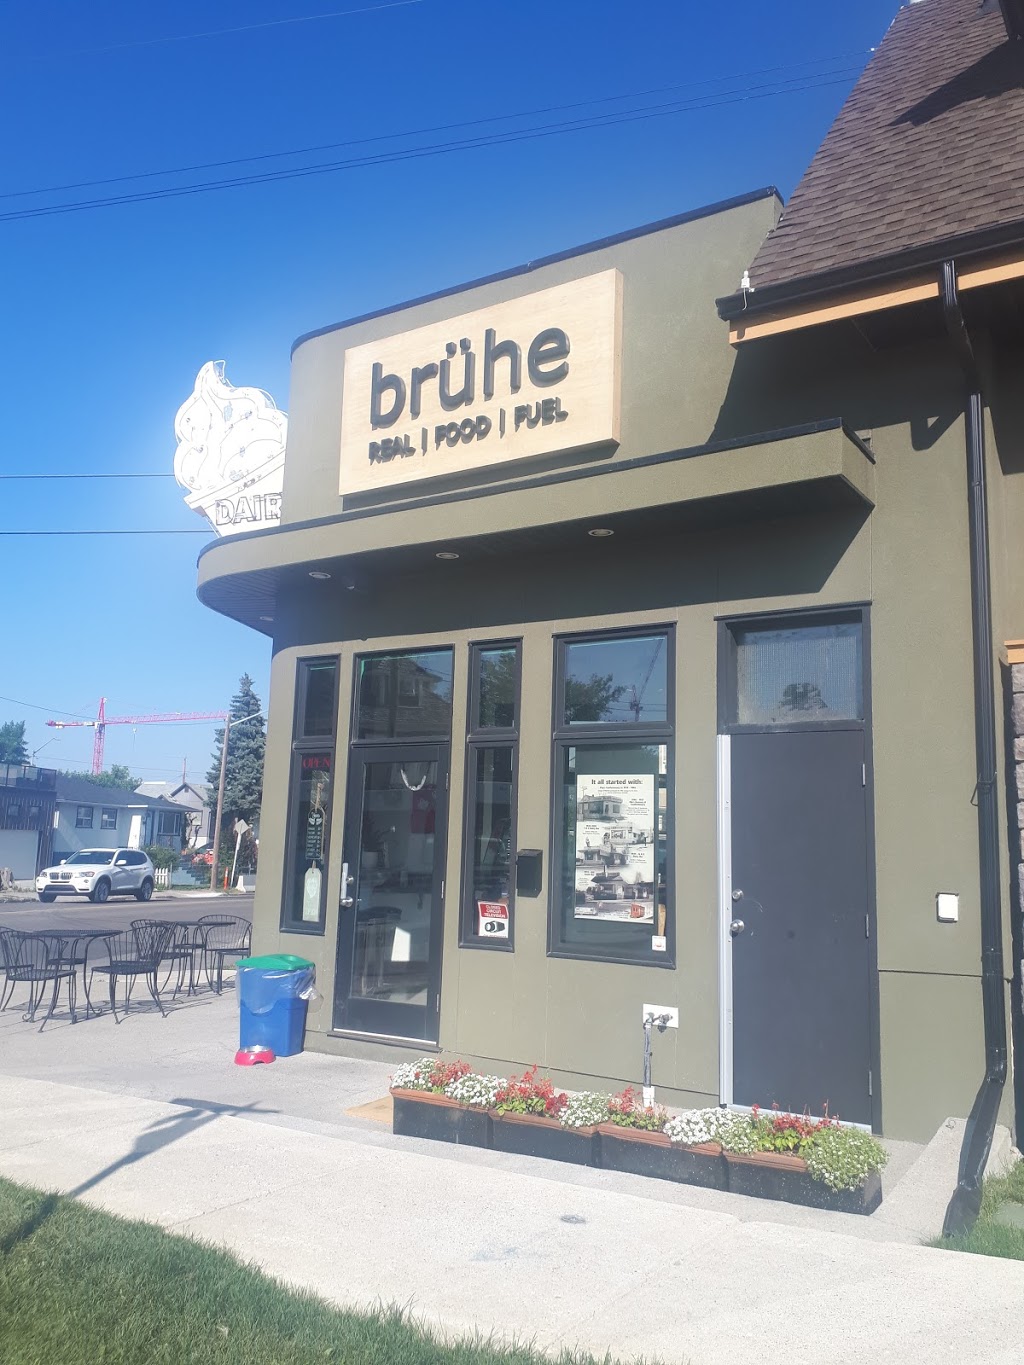 Bruhe Real Food Fuel | store | 1024 Bellevue Ave SE, Calgary, AB T2G 4L1, Canada | 4032626700 OR +1 403-262-6700